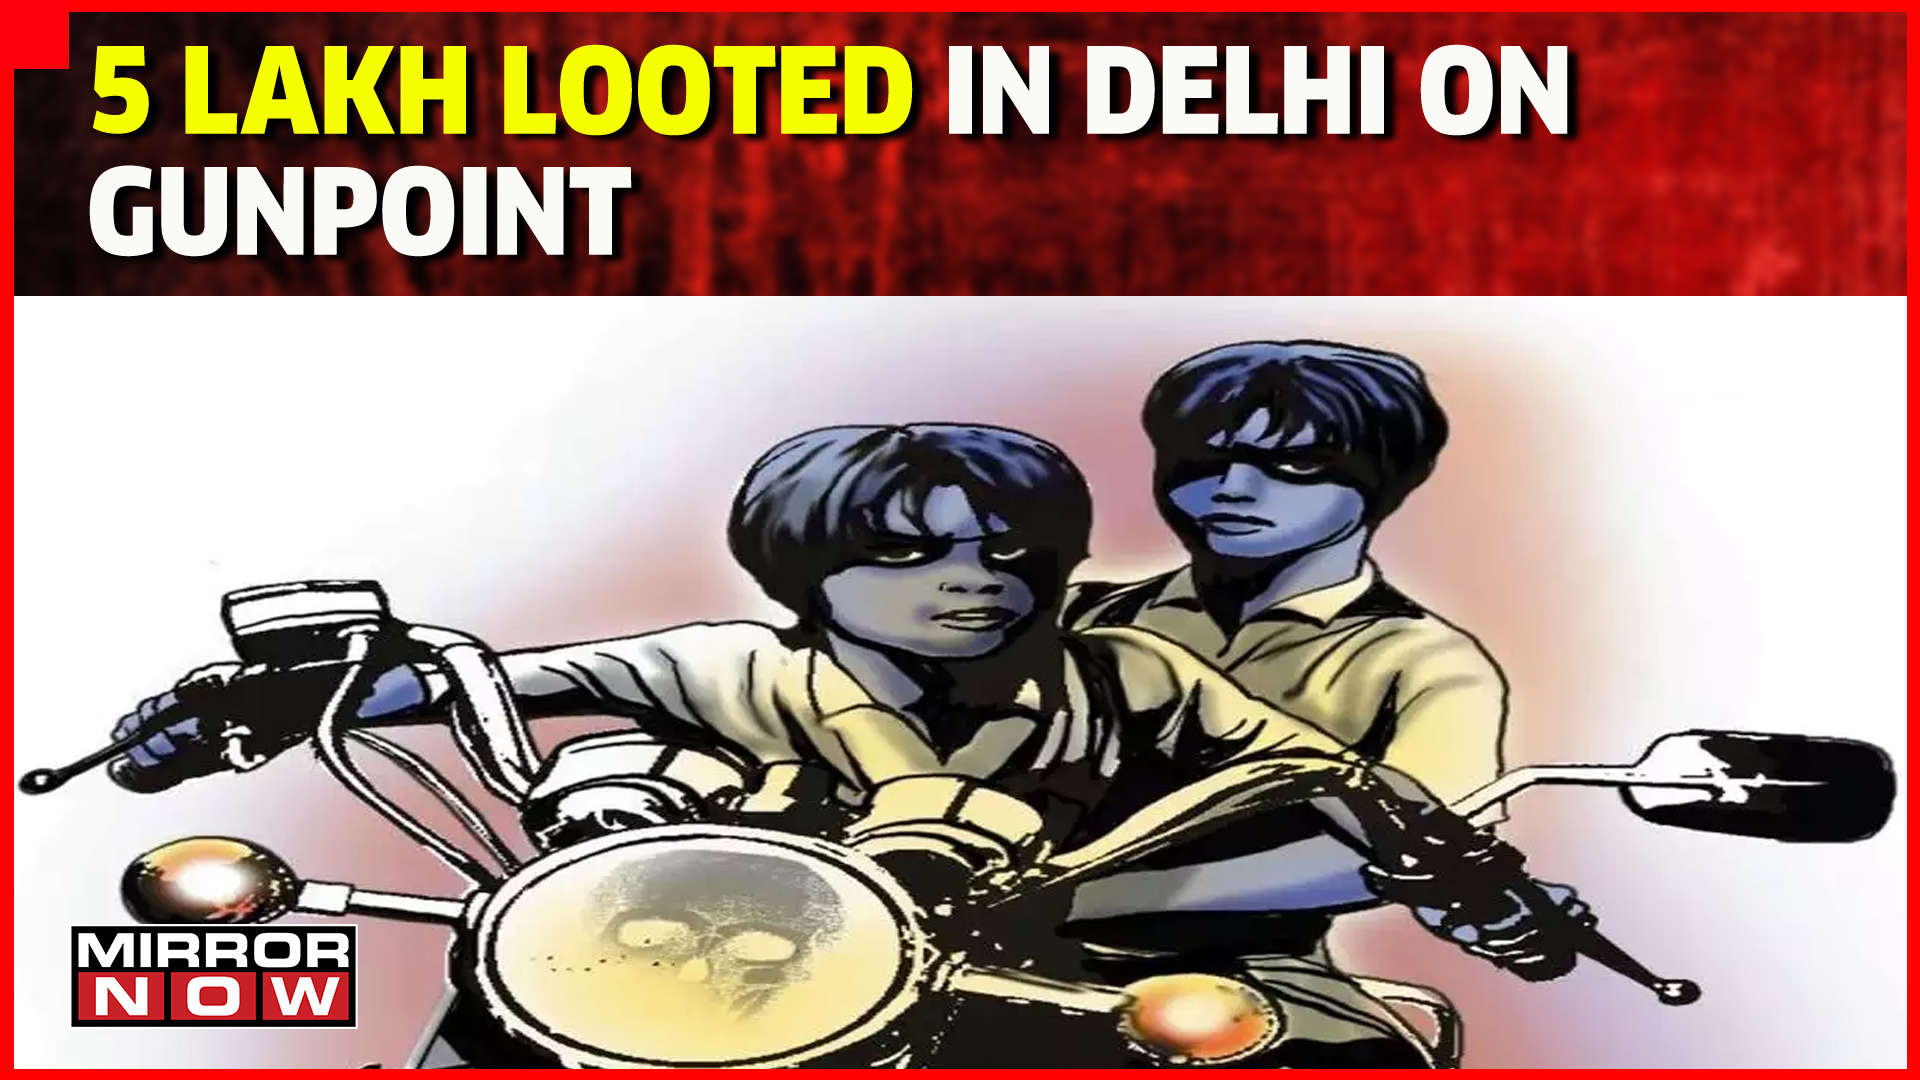 4 Bike-Borne Men Looted Rs 5 Lakh From A Man In Delhi Captured In CCTV  Camera